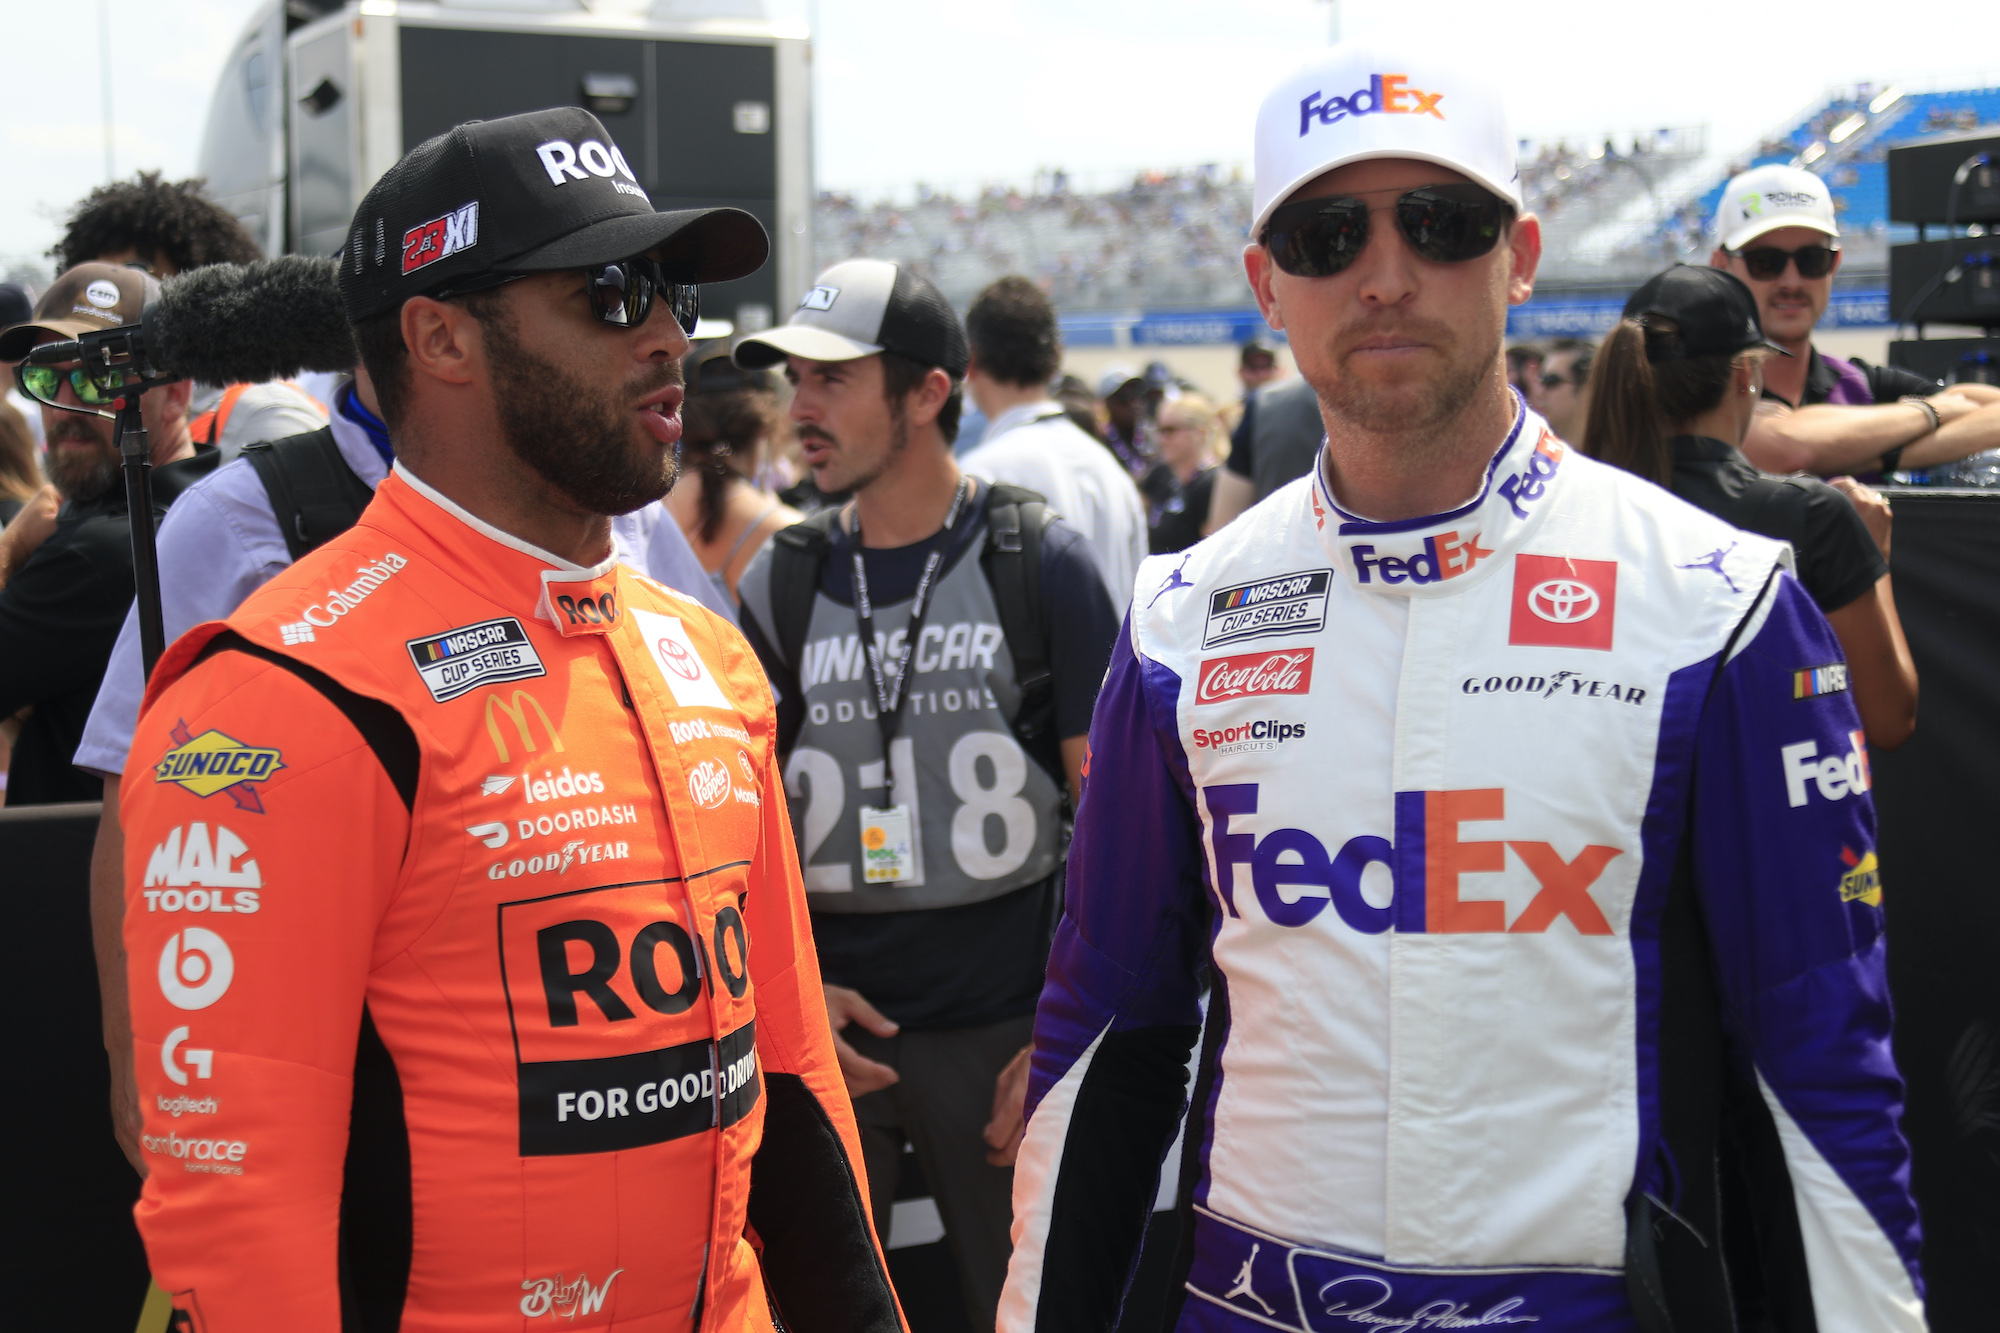 Denny Hamlin Challenges Veteran Announcer for Questioning Joe Gibbs Racing Move to Swap Pit Crew Members Between Bubba Wallace and Christopher Bell’s Teams 